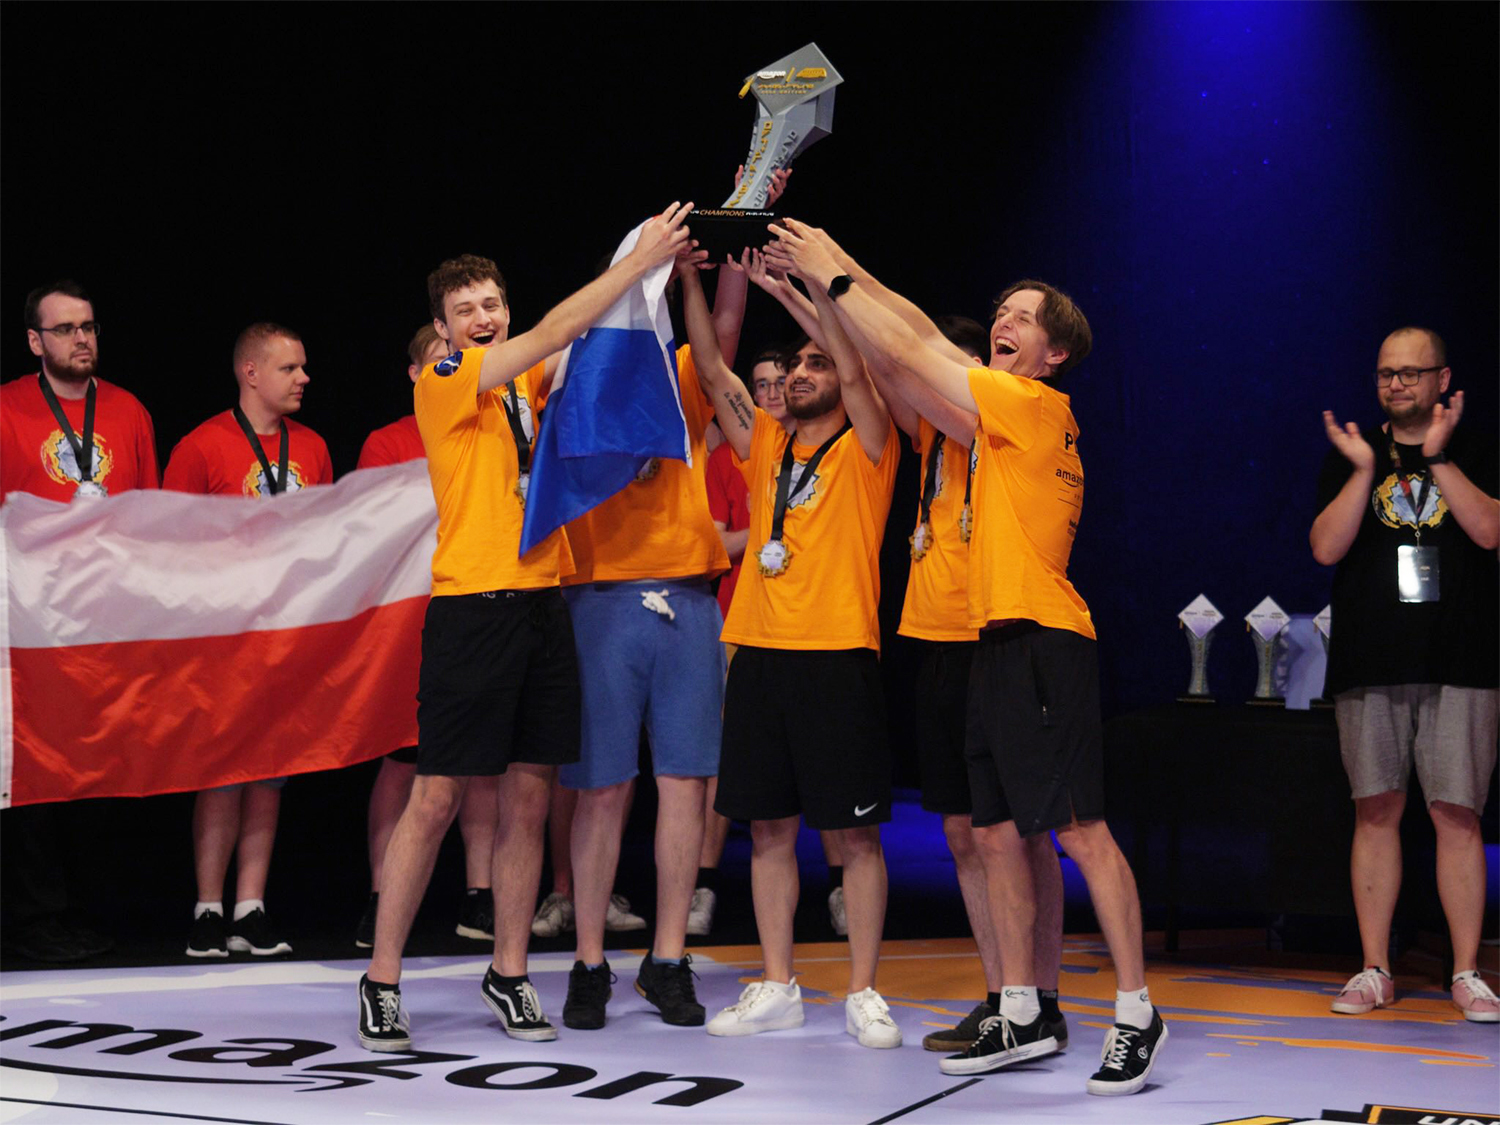 Esports team raise trophy in victory